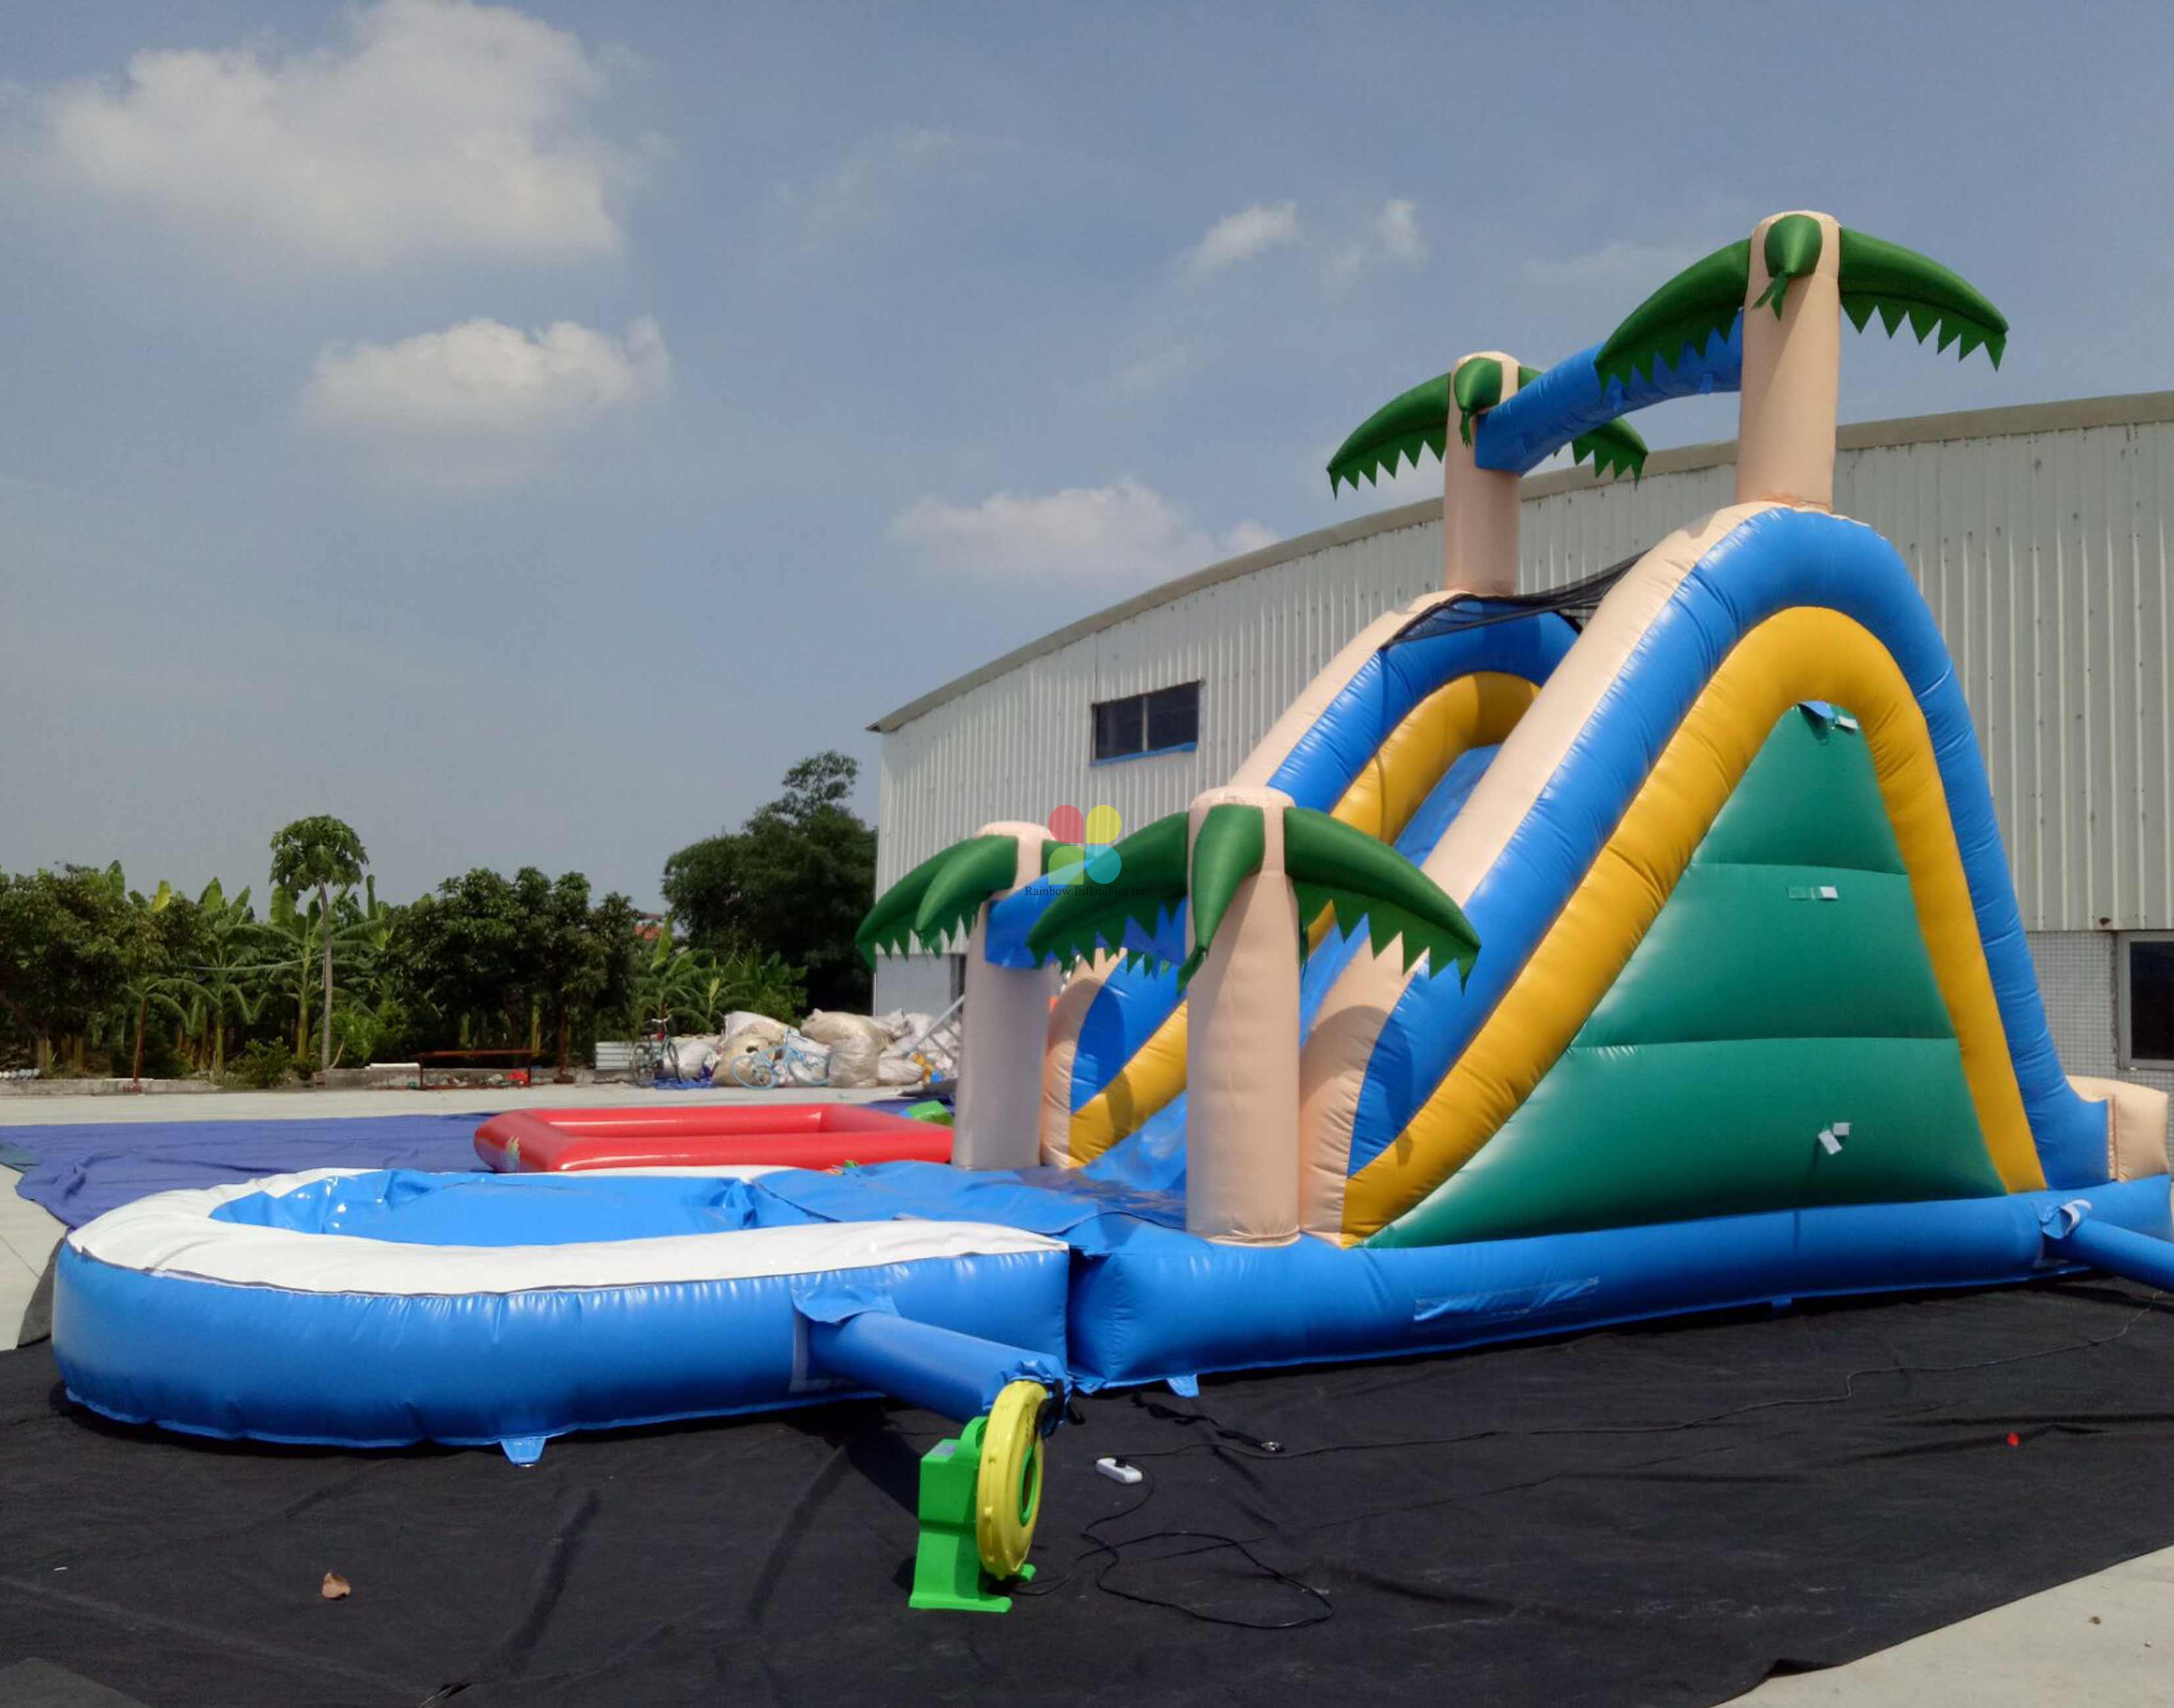 Palm tree design inflatable water slide kids play game with free blower